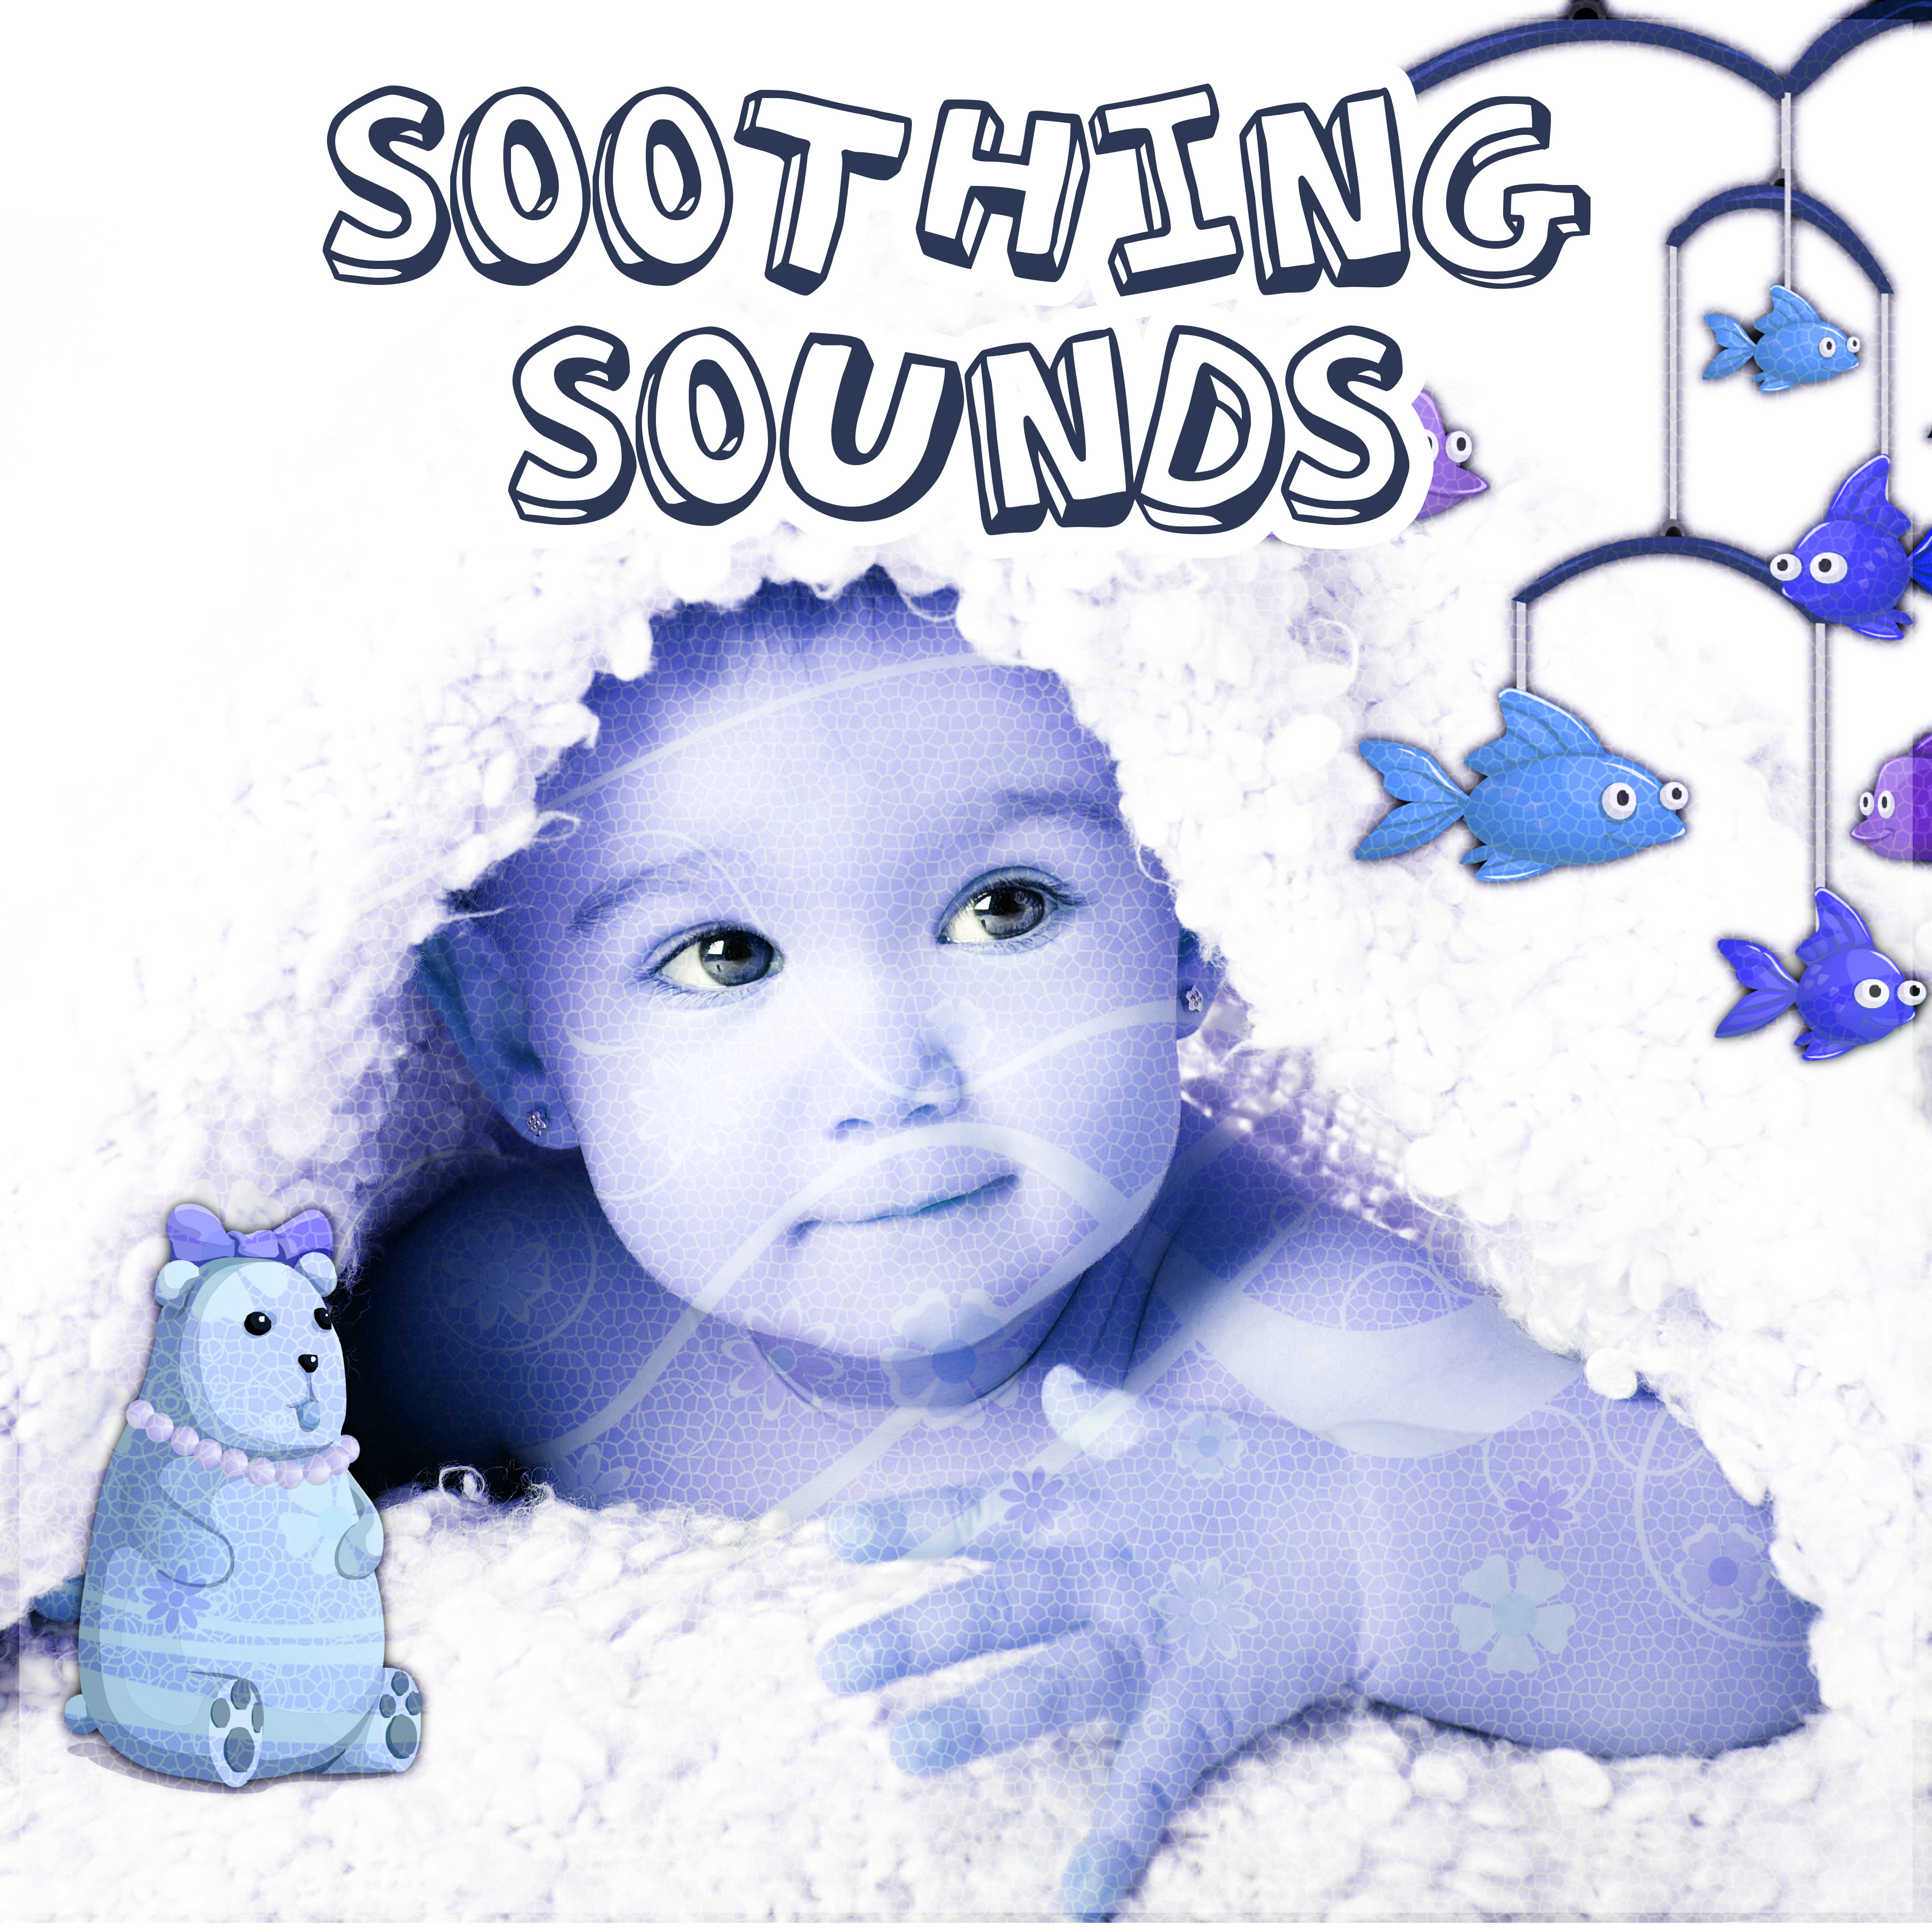 Soothing Sounds – Help Your Baby Sleep, Beautiful Sounds to Calm Child, Lullaby for Deep Sleep, Relaxation & Massage, White Noise to Calm Down